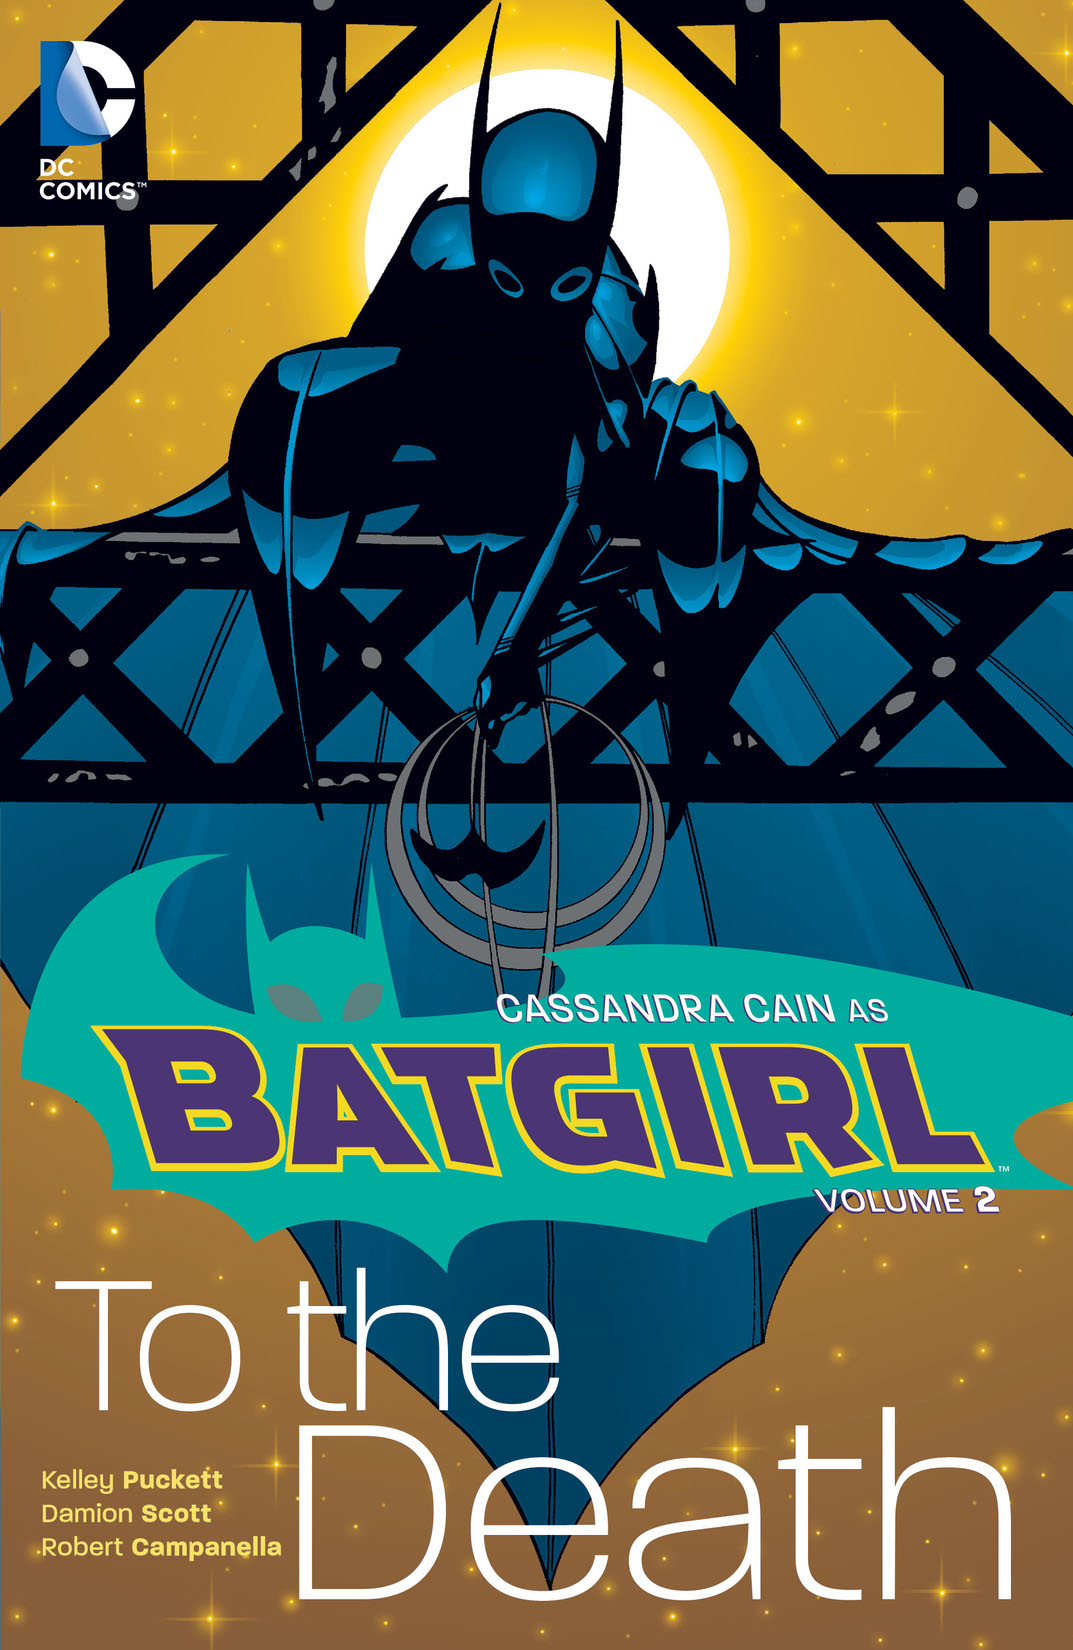 Batgirl Vol. 2: To the Death preview images